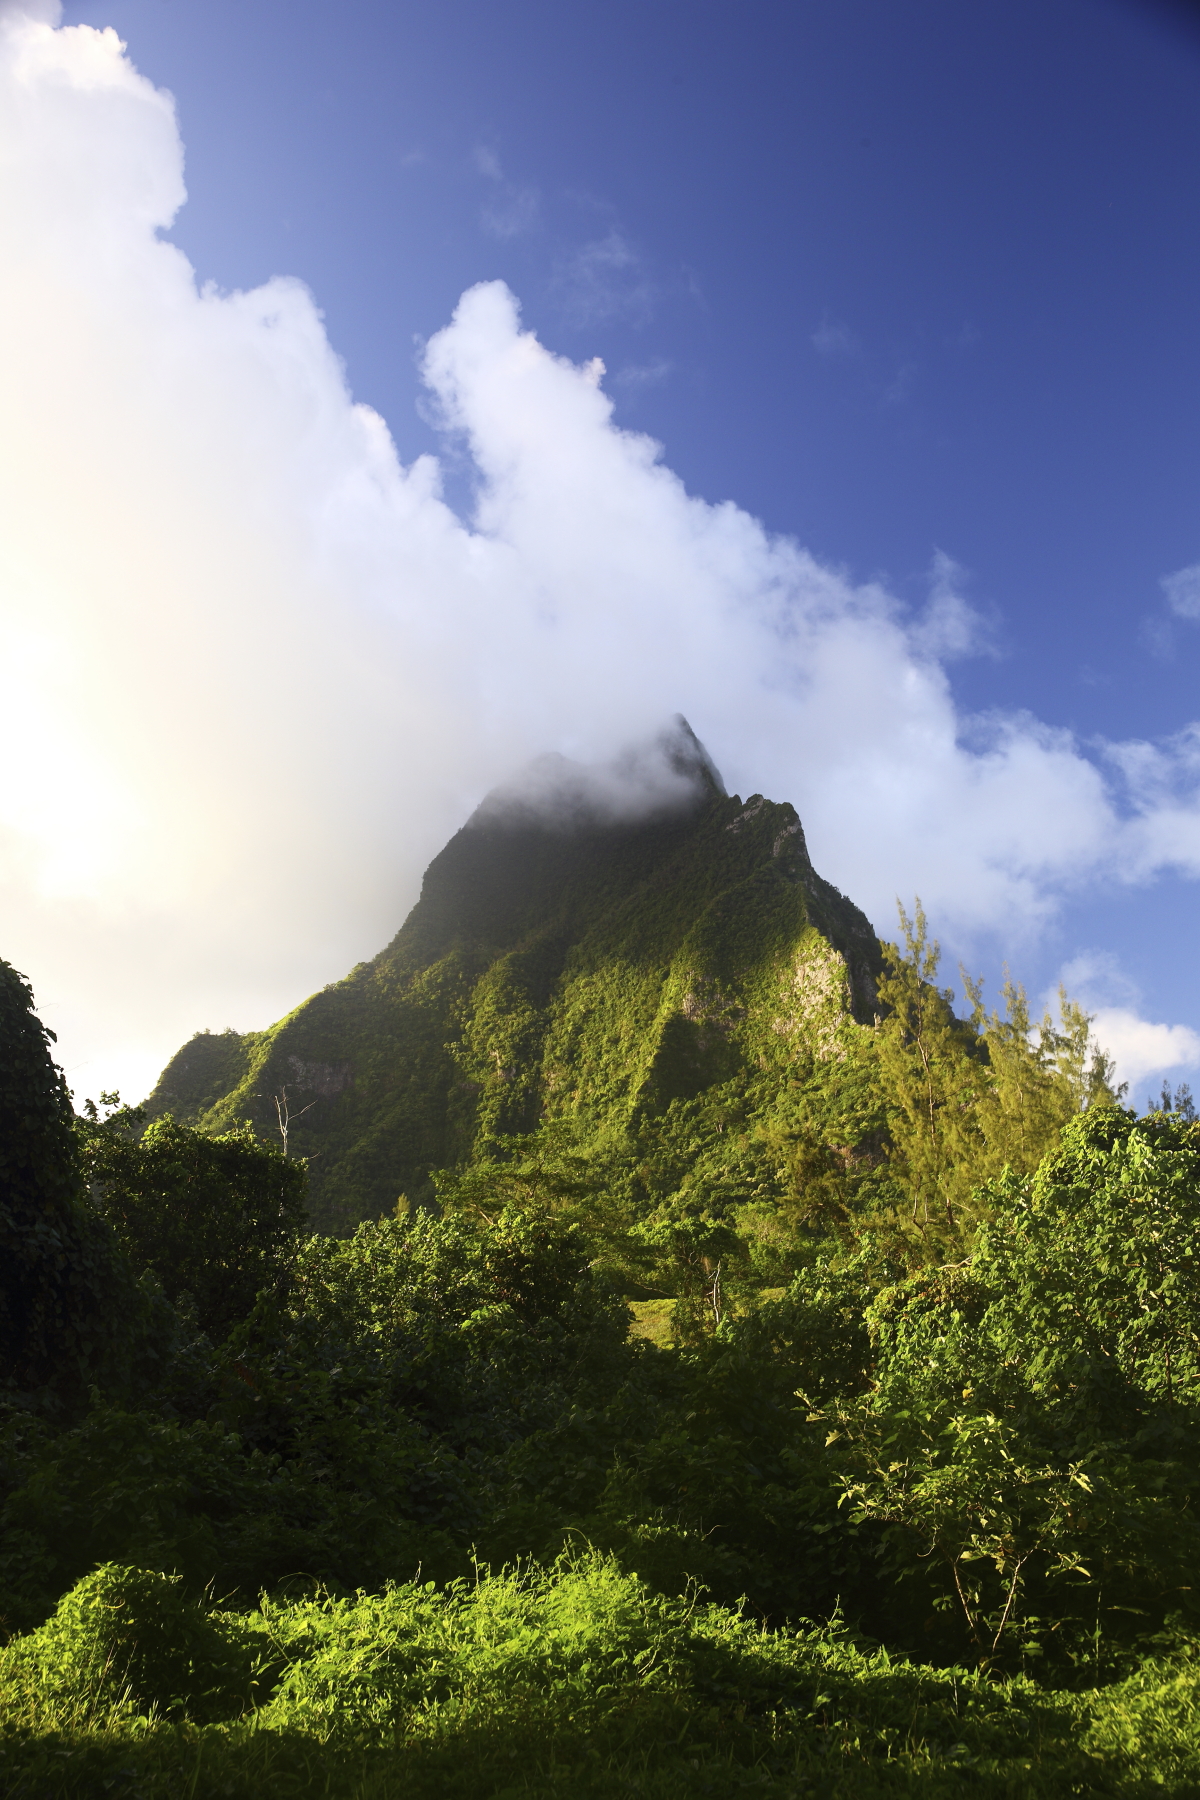 Up in the mountains of Moorea, Tahiti